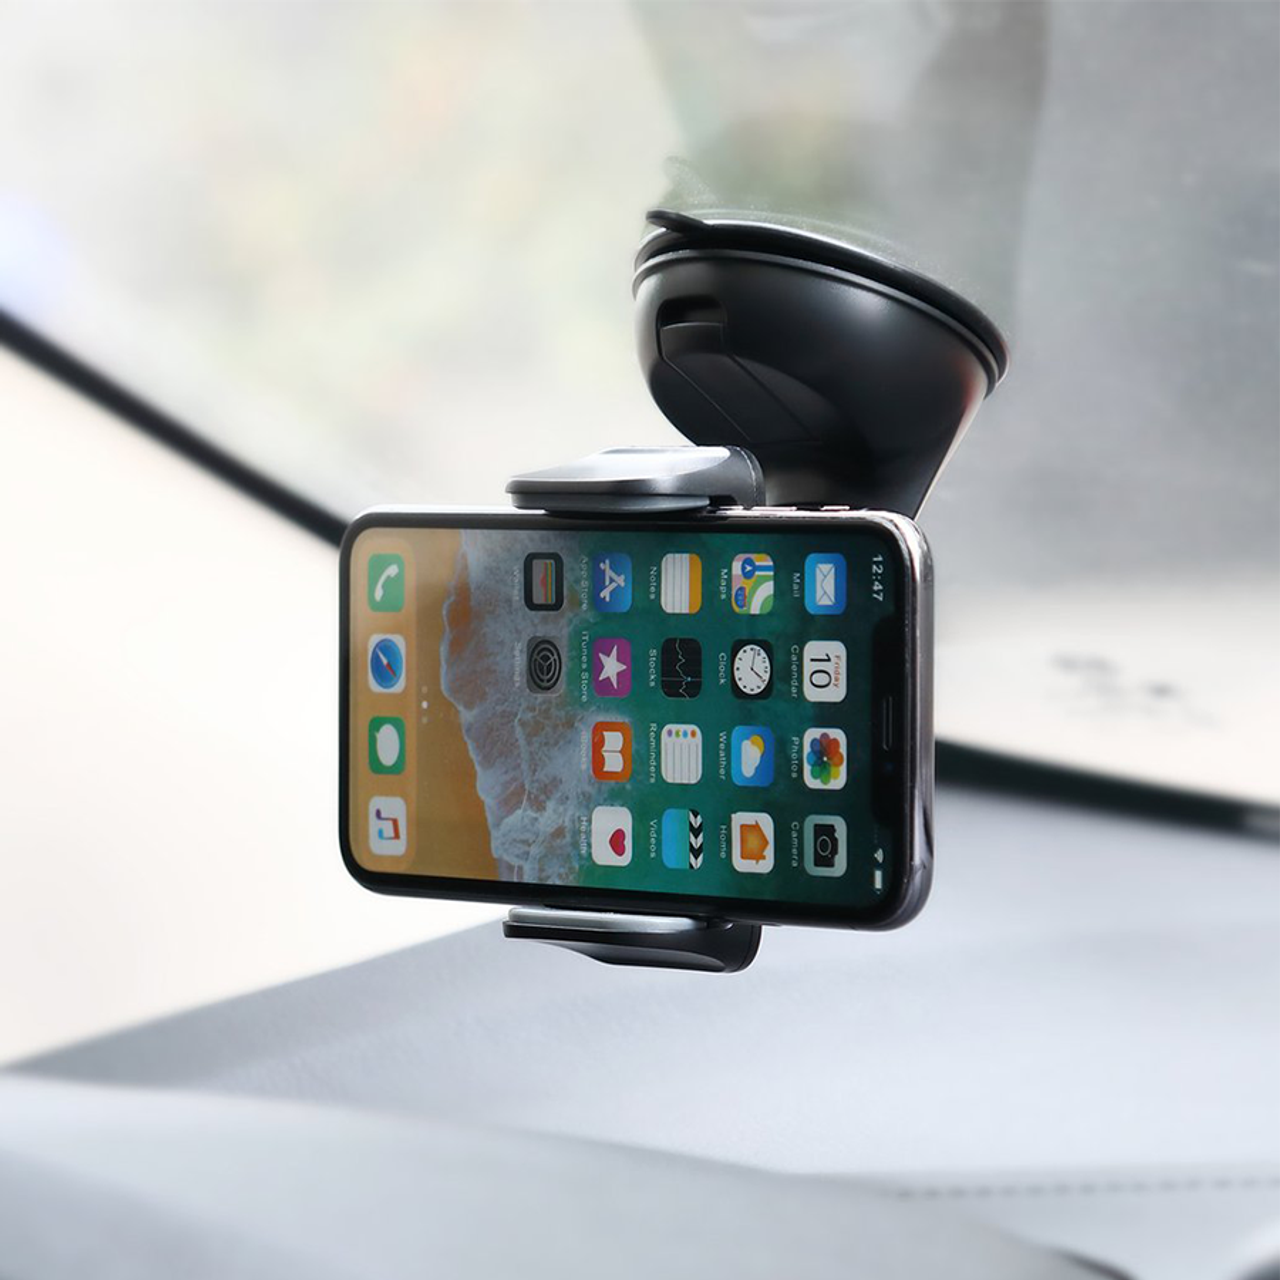 Universal Mount for Smartphones product image